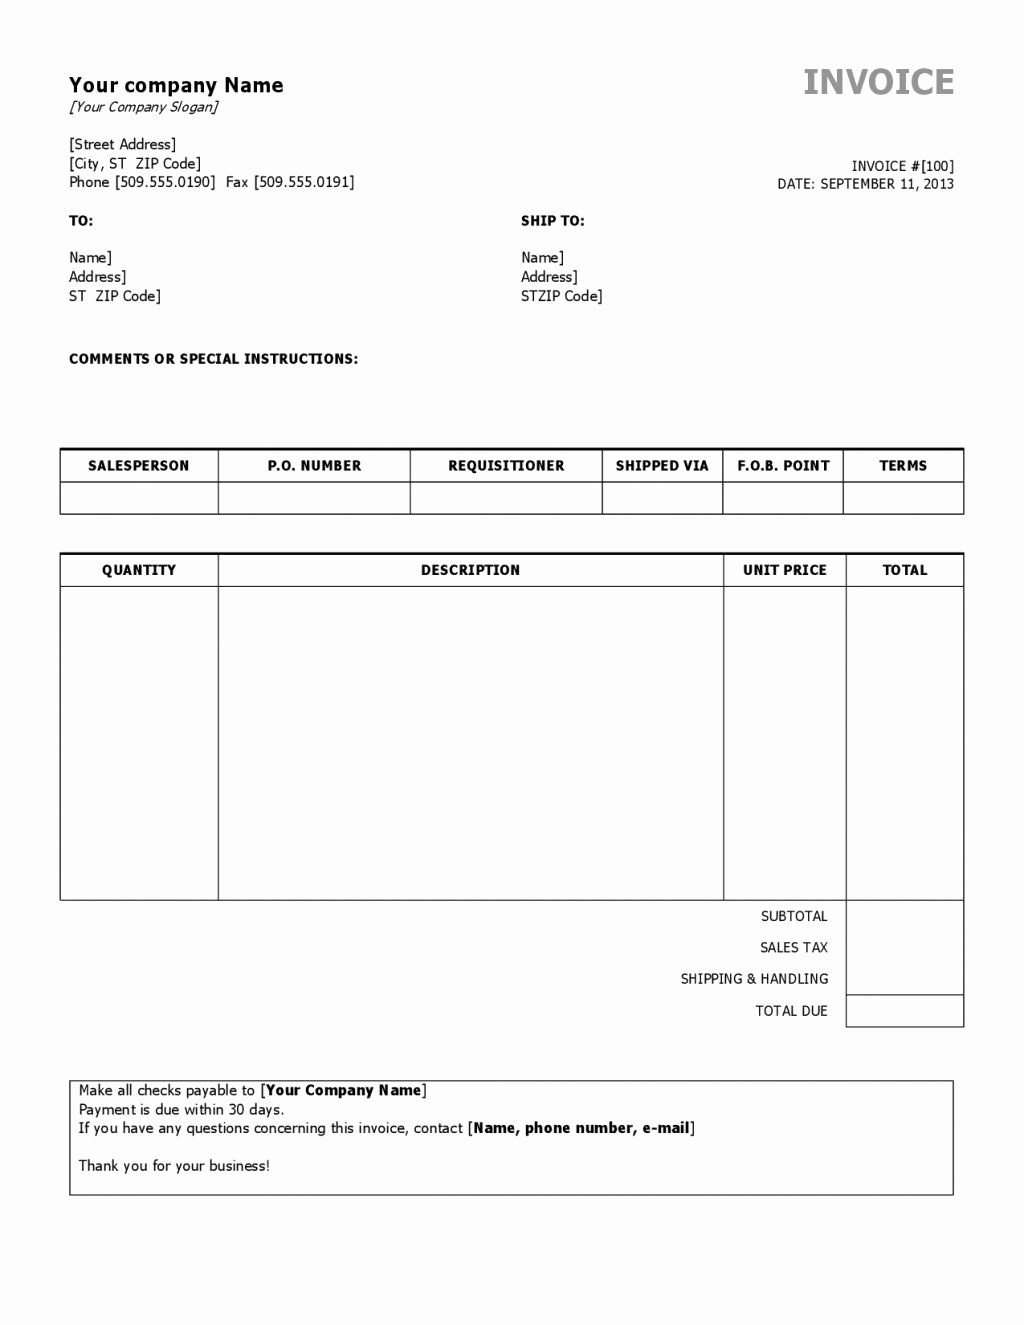 Copy Of An Invoice Template Lovely Copy Invoice Invoice Design Inspiration